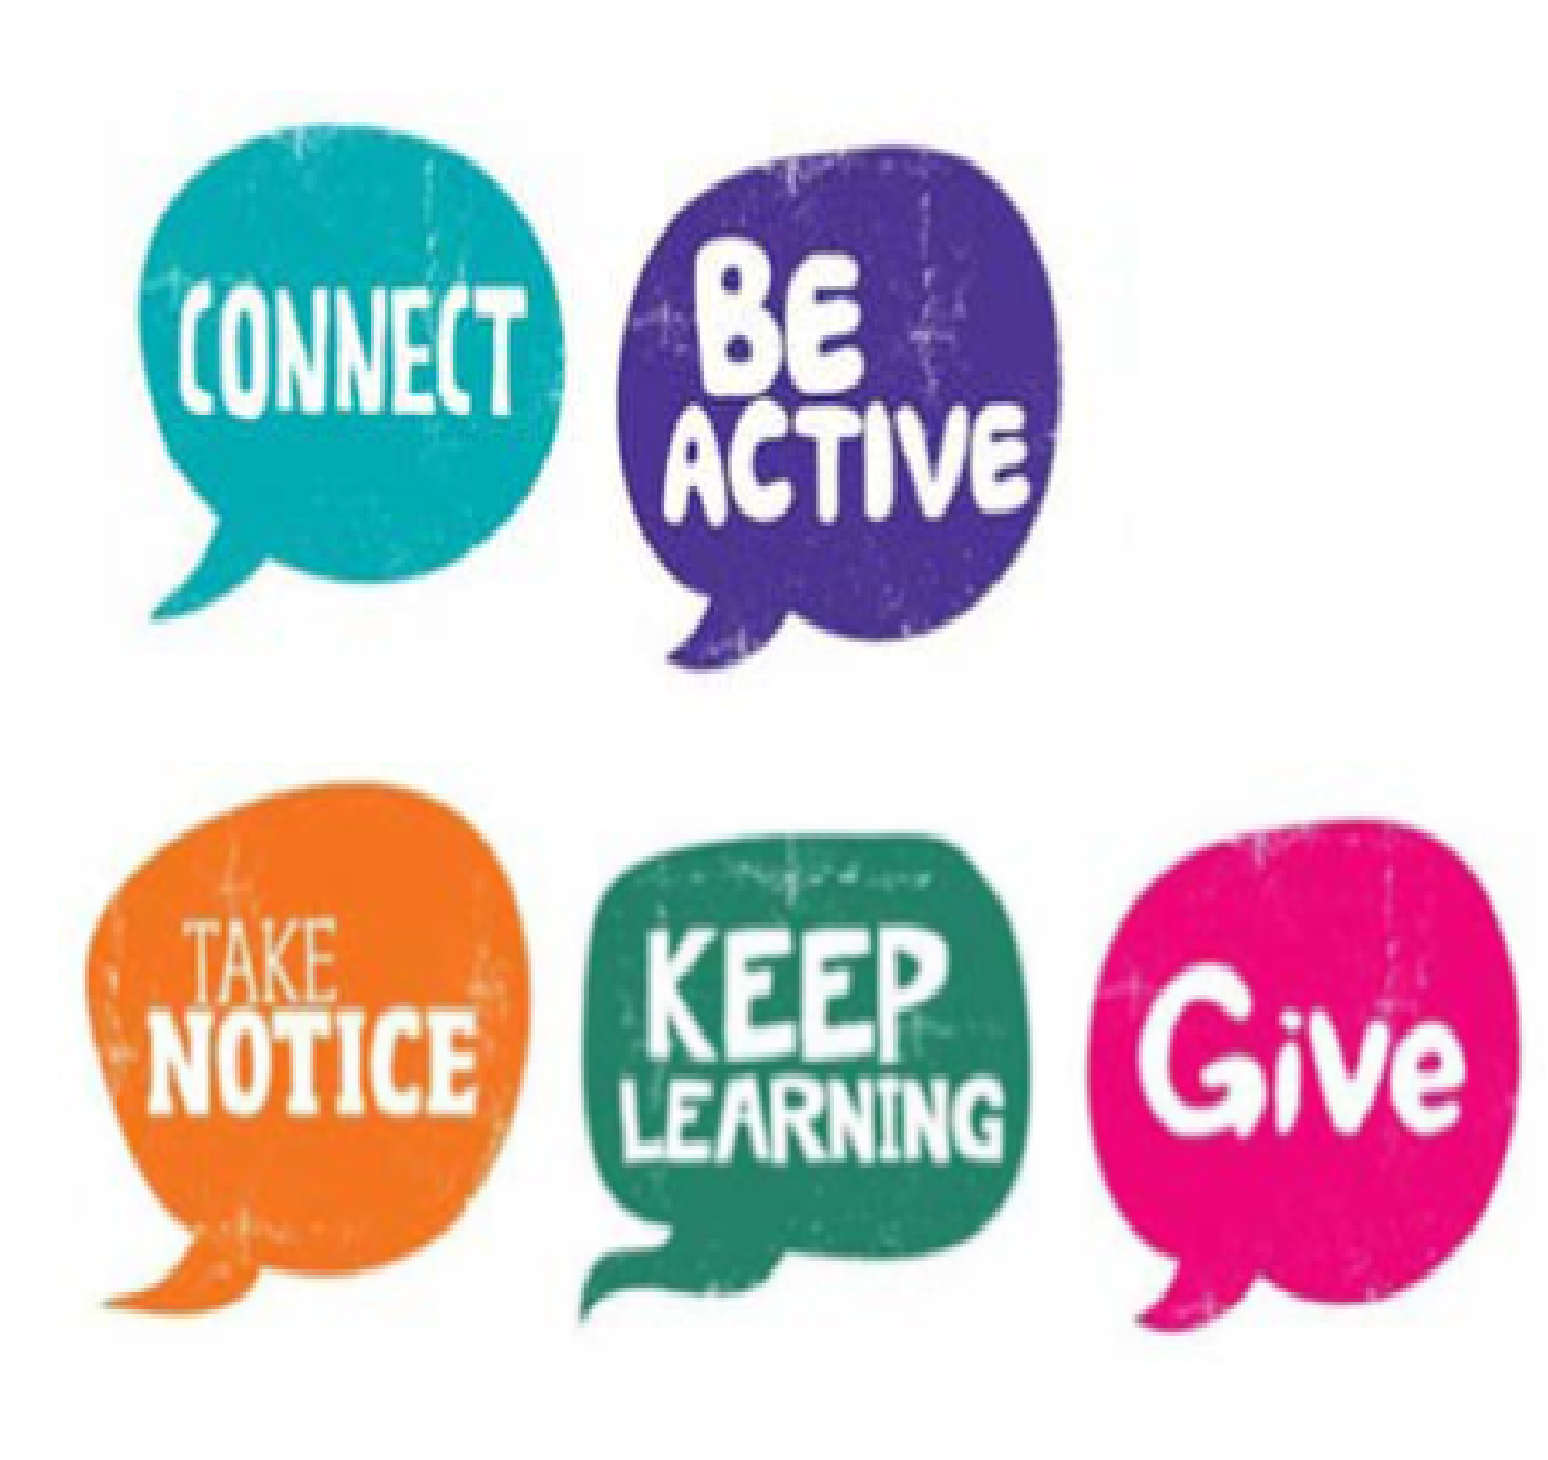 Connect, Be active, Take notice, Keep learning, Give